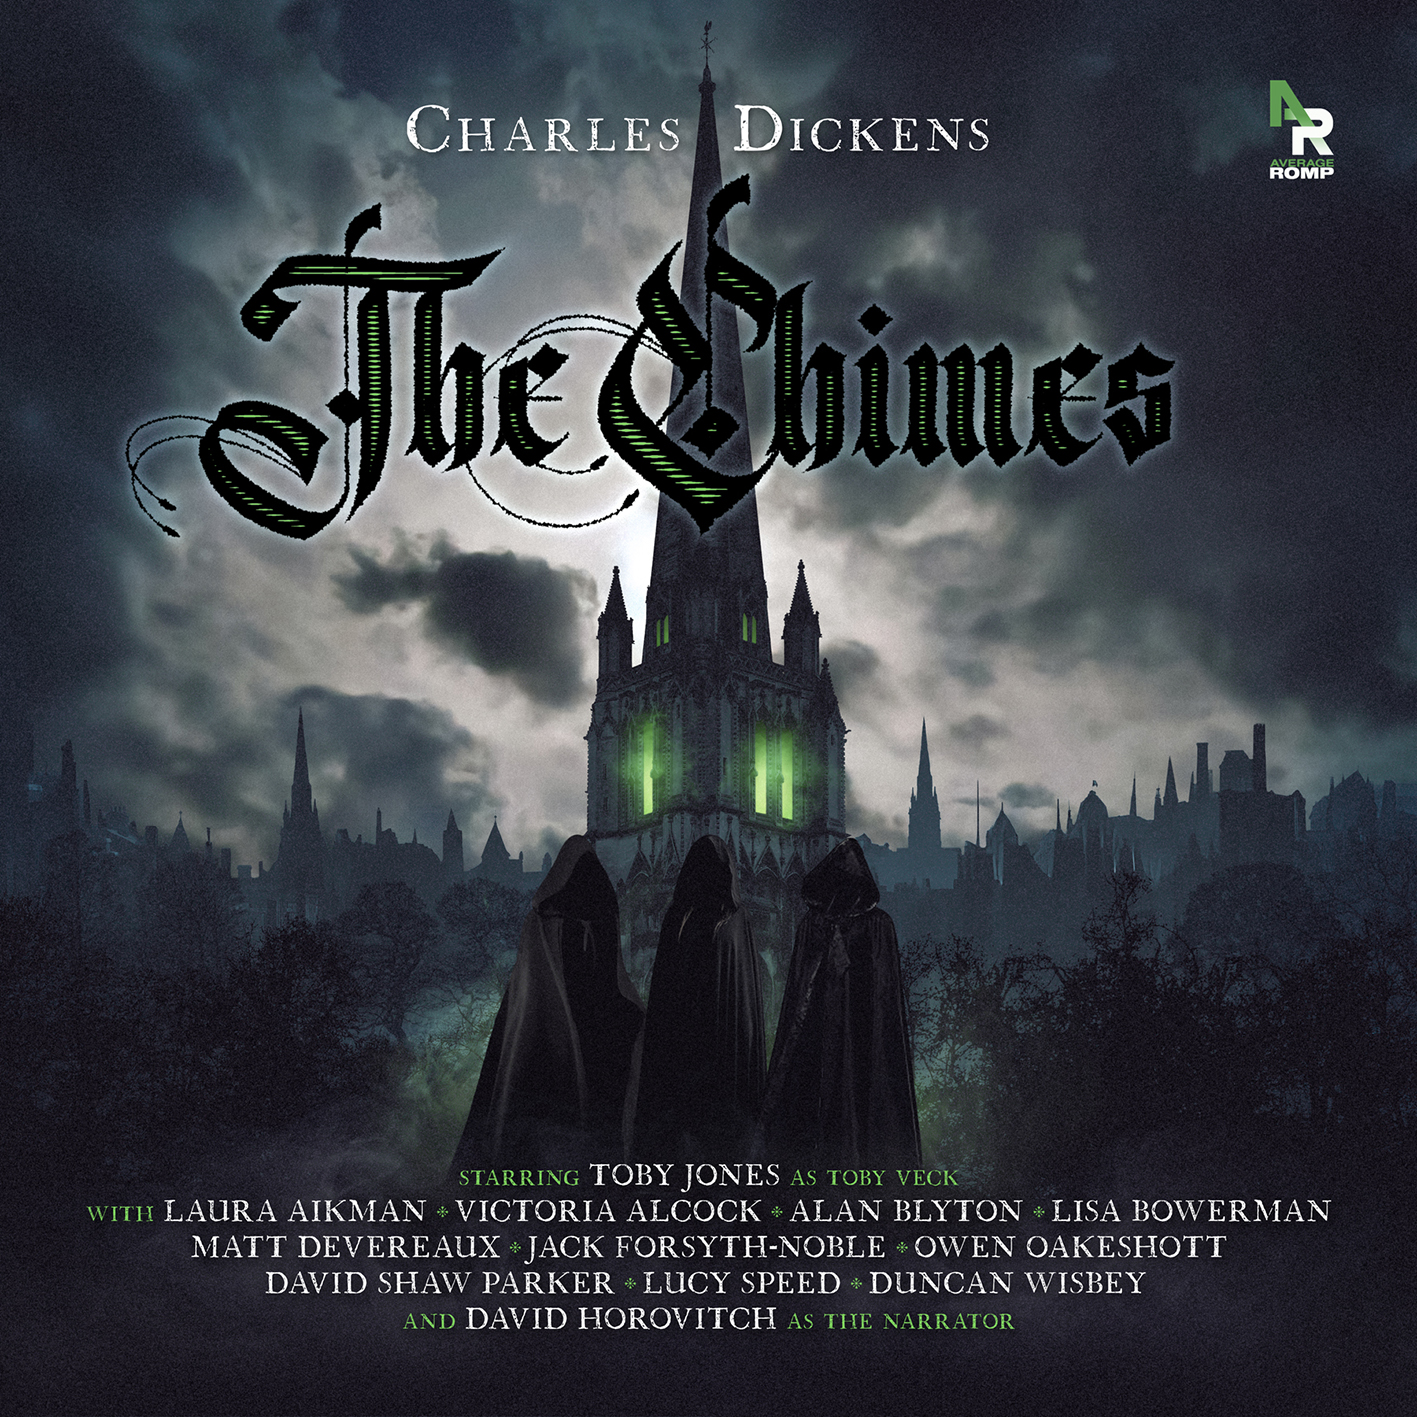 Cover for Charles Dickens's The Chimes